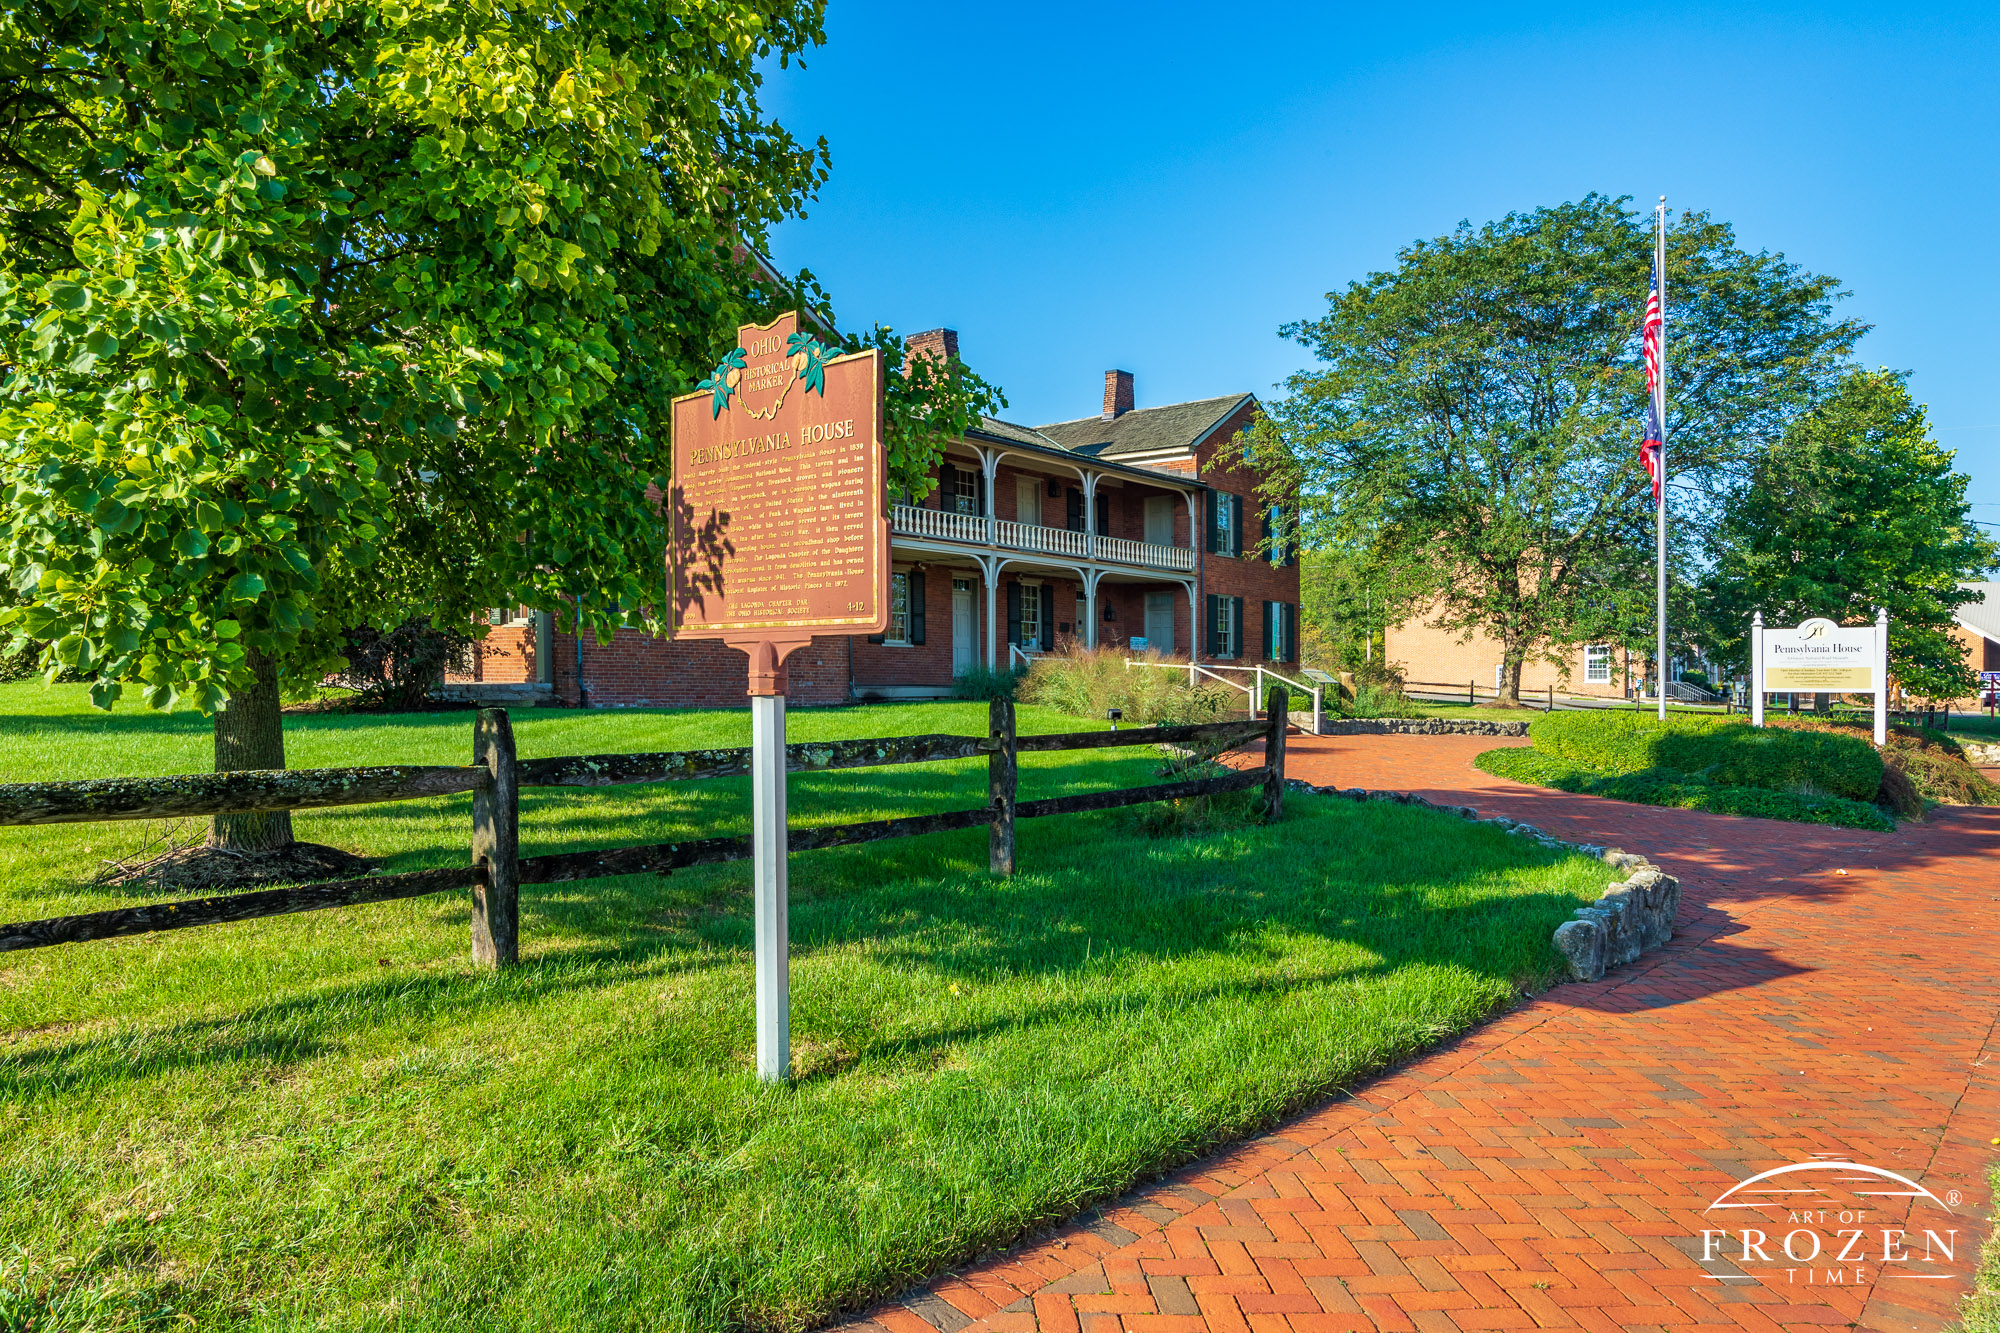 A historic inn and tavern as the National Road passes through Springfield Ohio